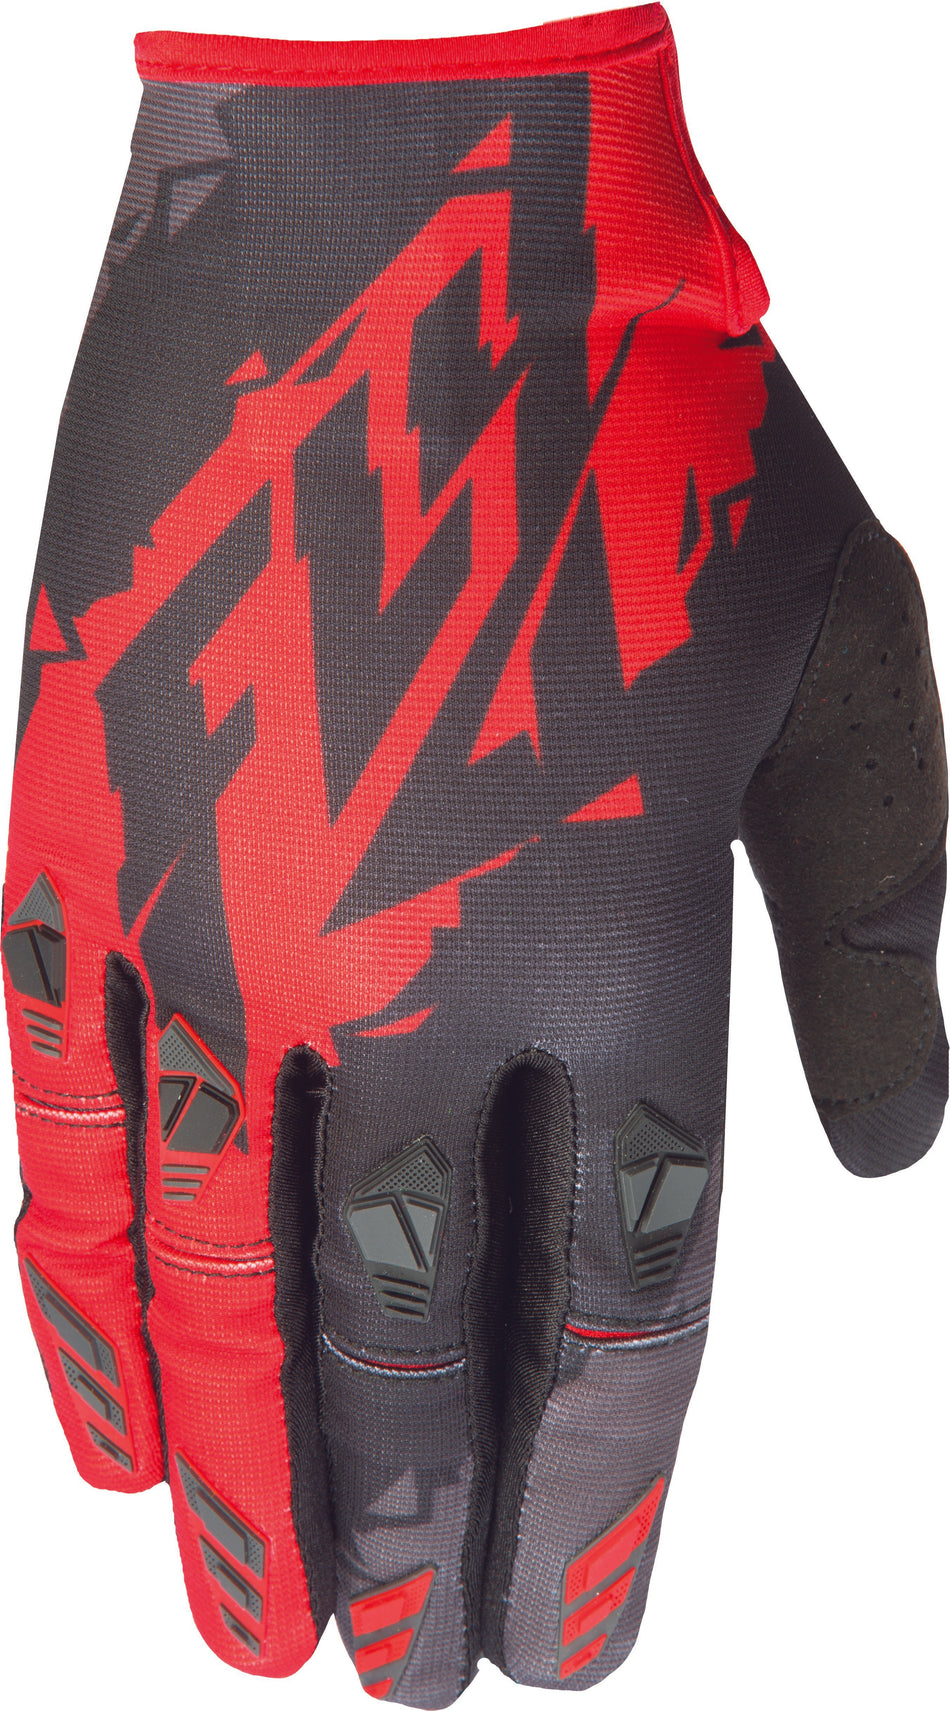 FLY RACING Kinetic Glove Black/Red Sz 10 L 370-41210